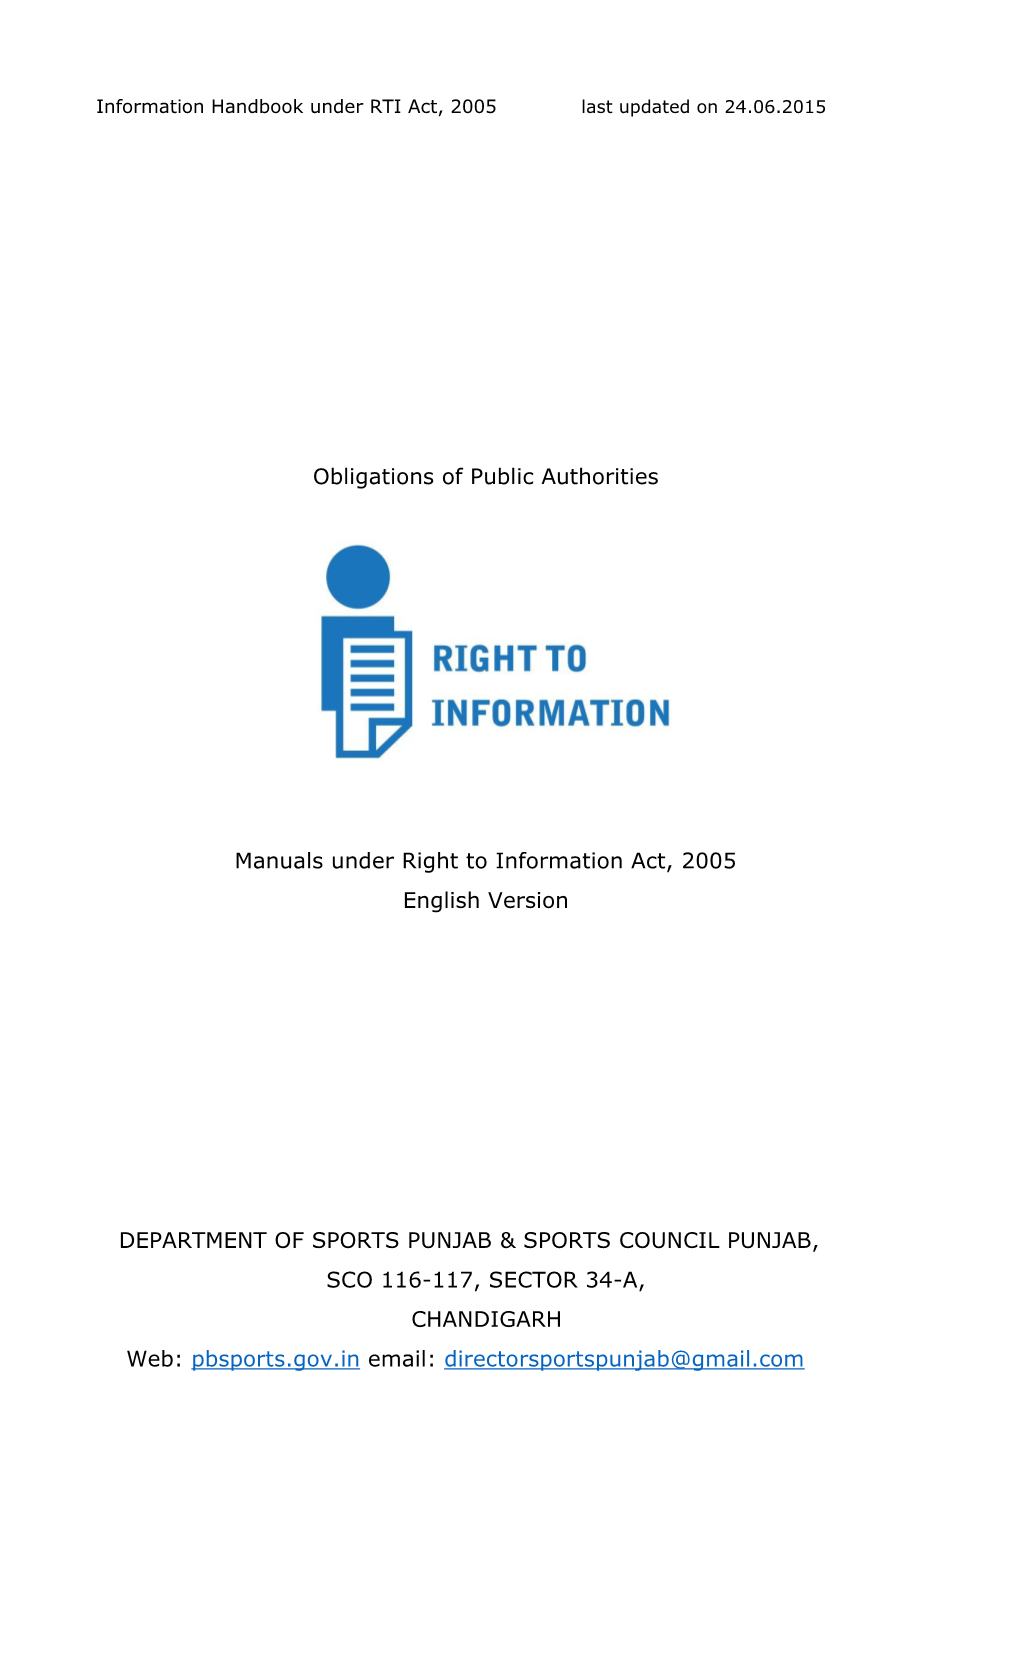 Obligations of Public Authorities Manuals Under Right to Information